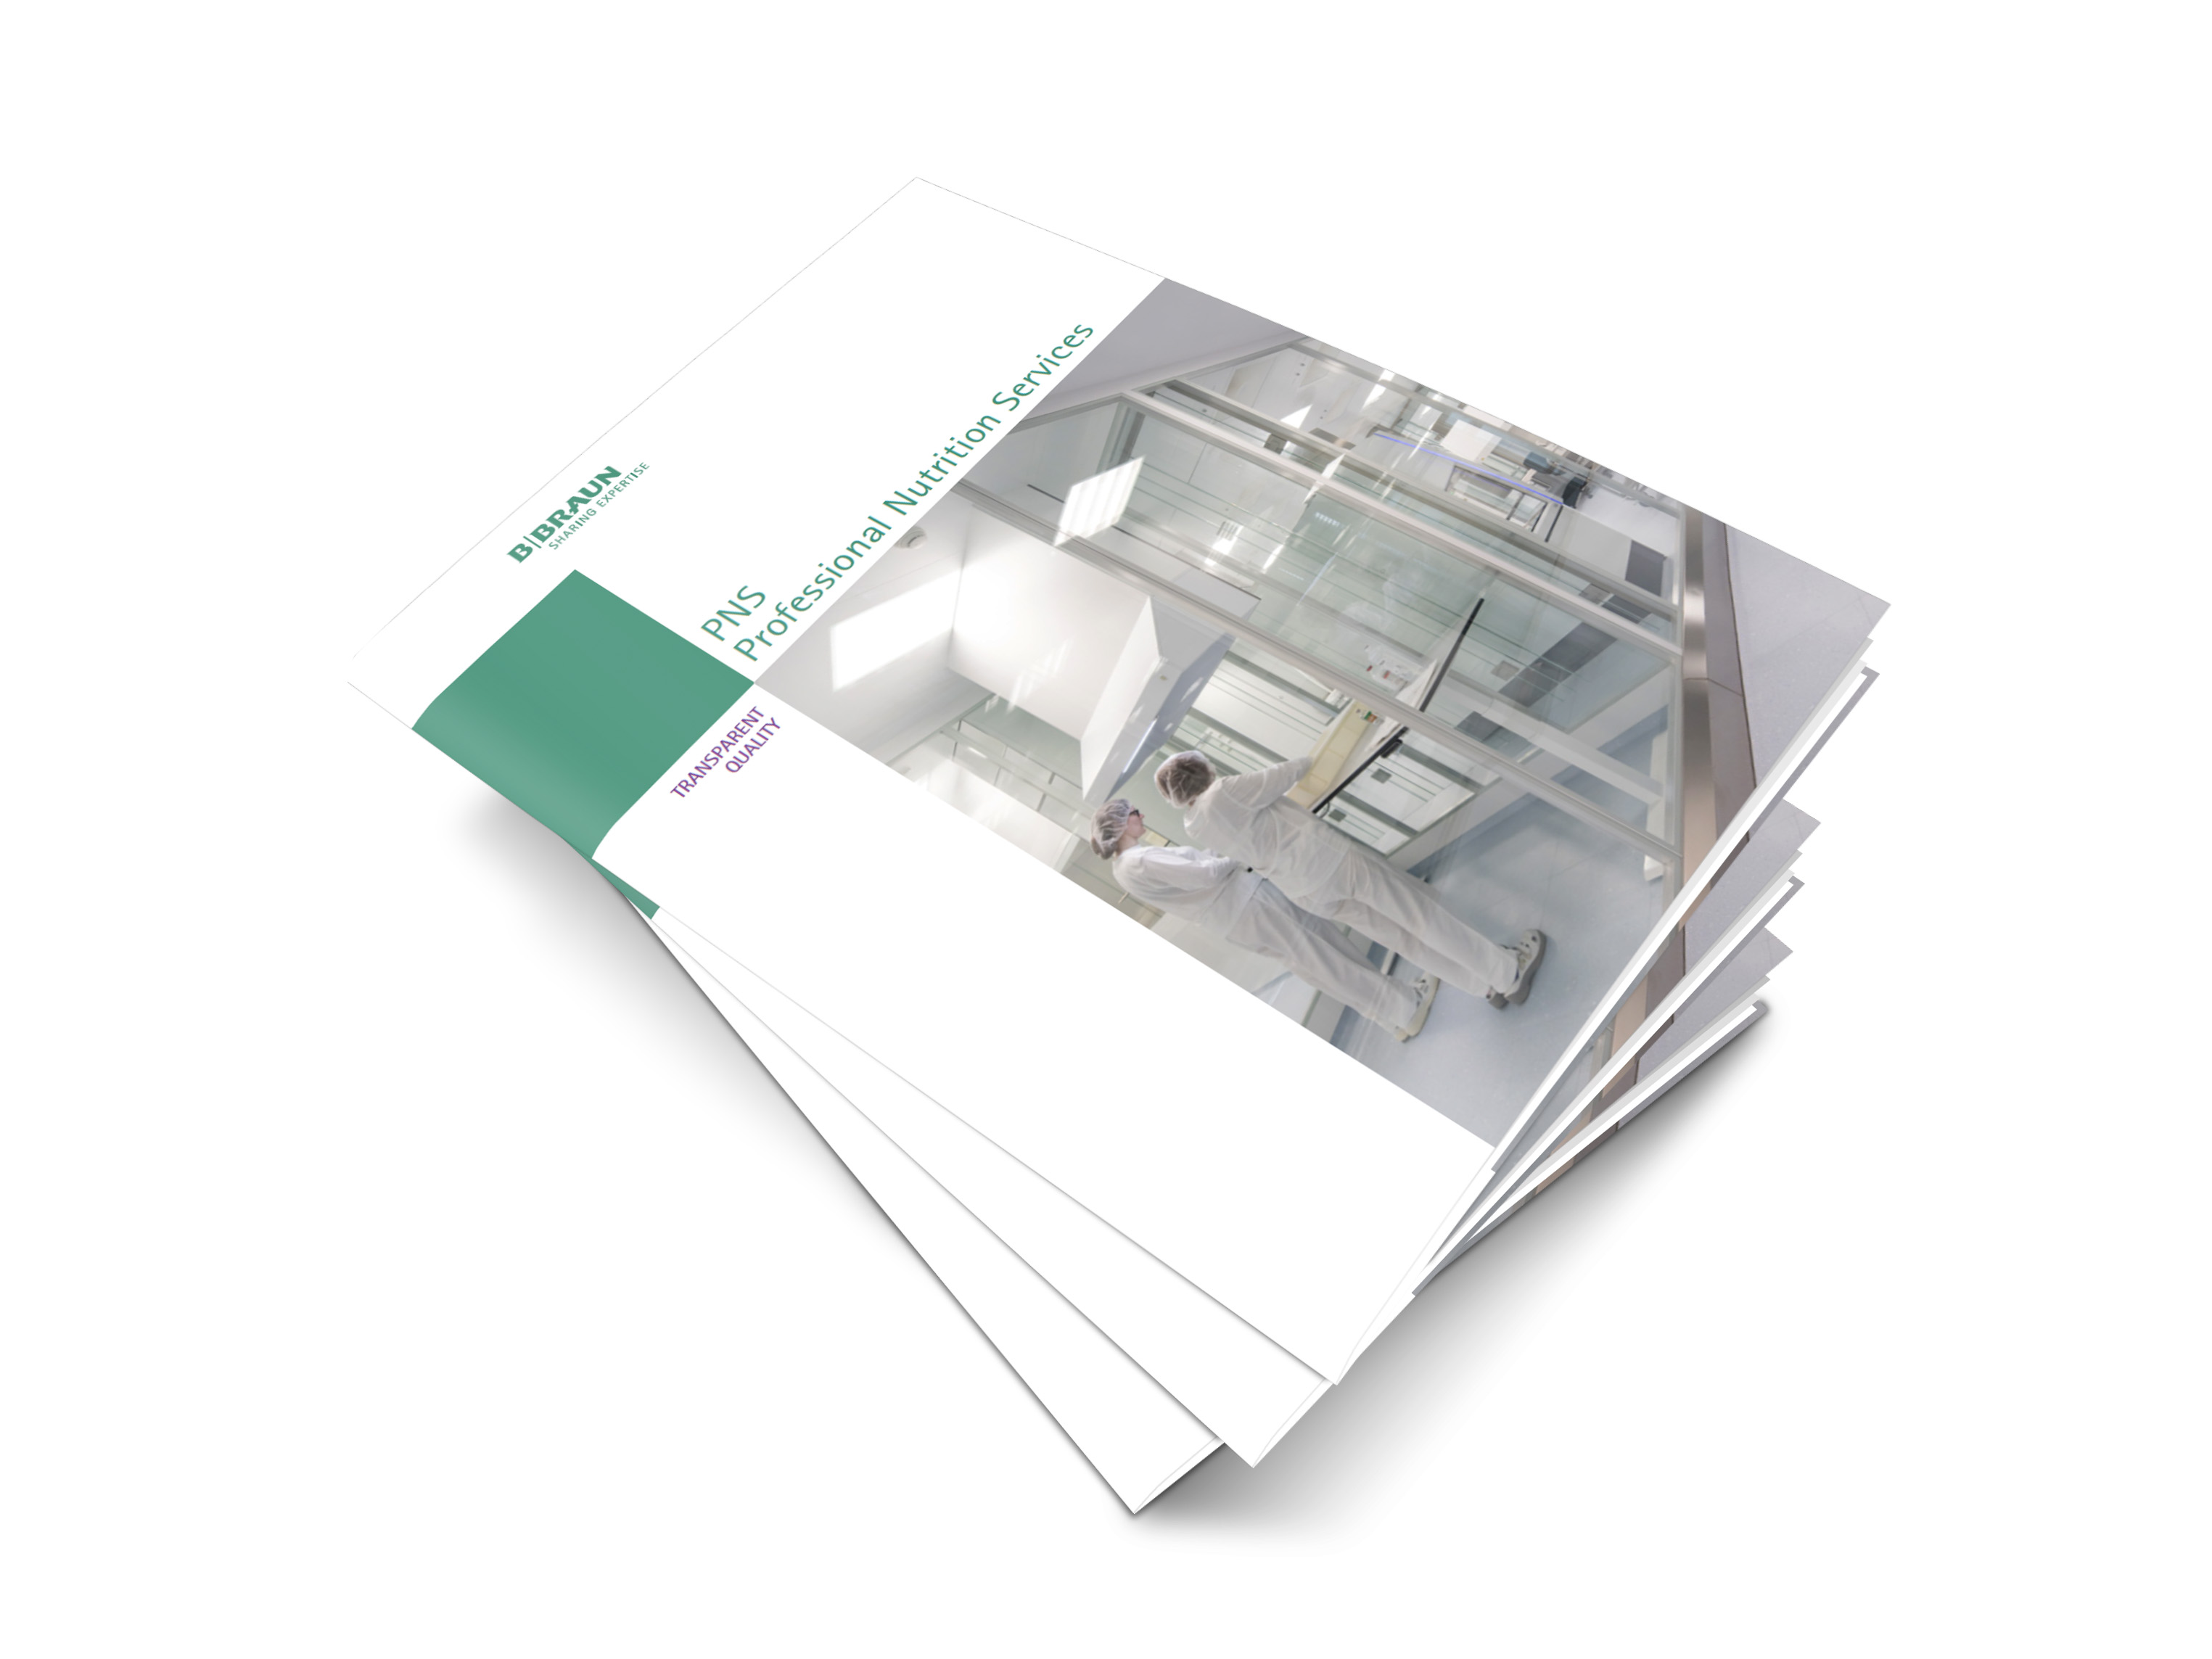 The B. Braun Professional Nutrition Services GmbH (PNS) brochure 